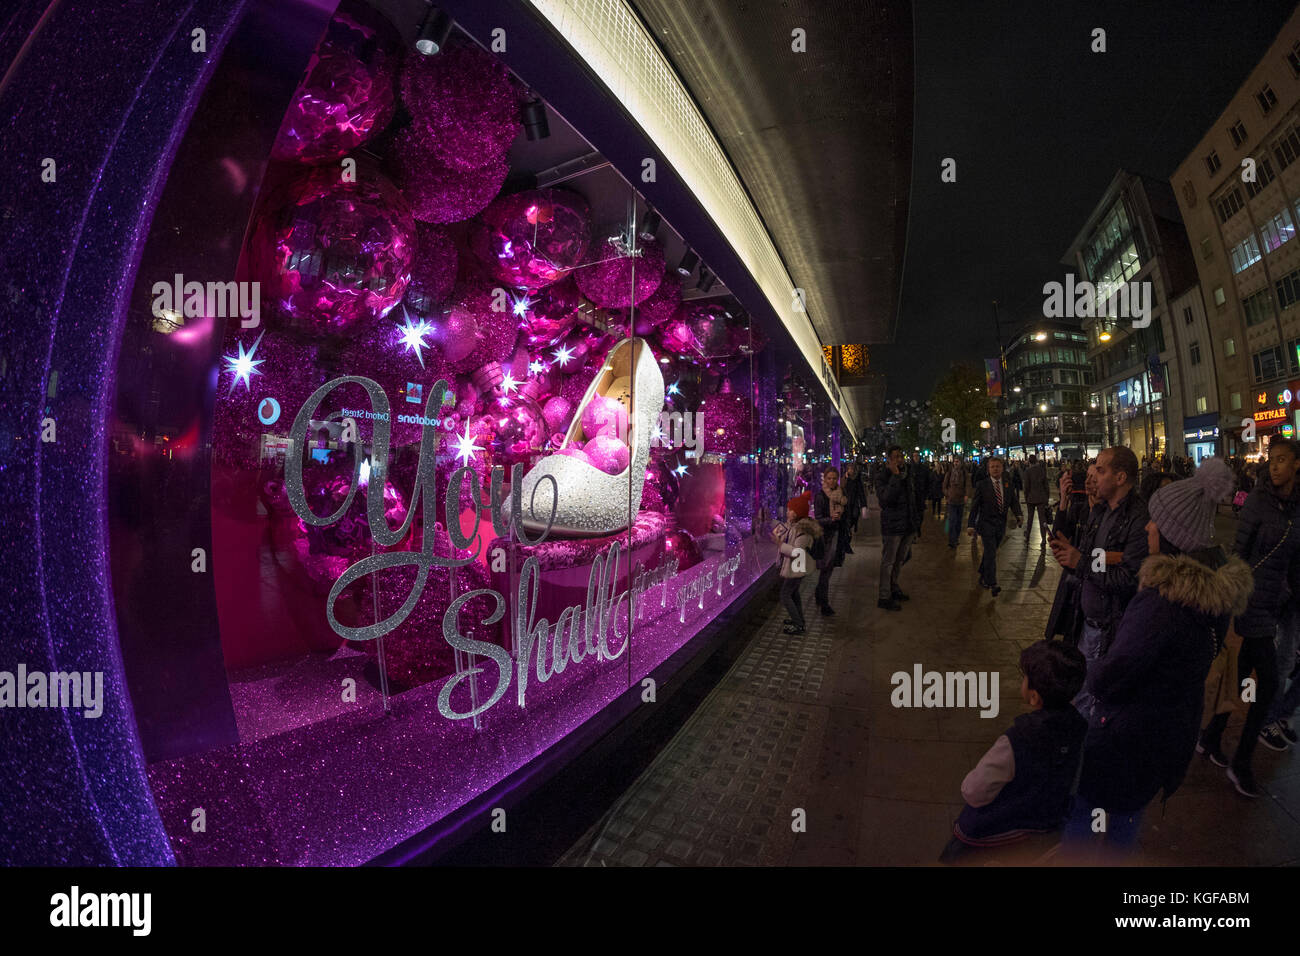 Oxford Street, London, UK. 7 November, 2017. Thousands turn up on Oxford Street, the UKs premier shopping street, to watch the annual Christmas lights switch-on at 18.15pm. The street is closed to through traffic from Oxford Circus through to Selfridges with traffic limited to crossing north to south. Photo: Cinderellas slipper in Debenhams window. Credit: Malcolm Park/Alamy Live News. Stock Photo